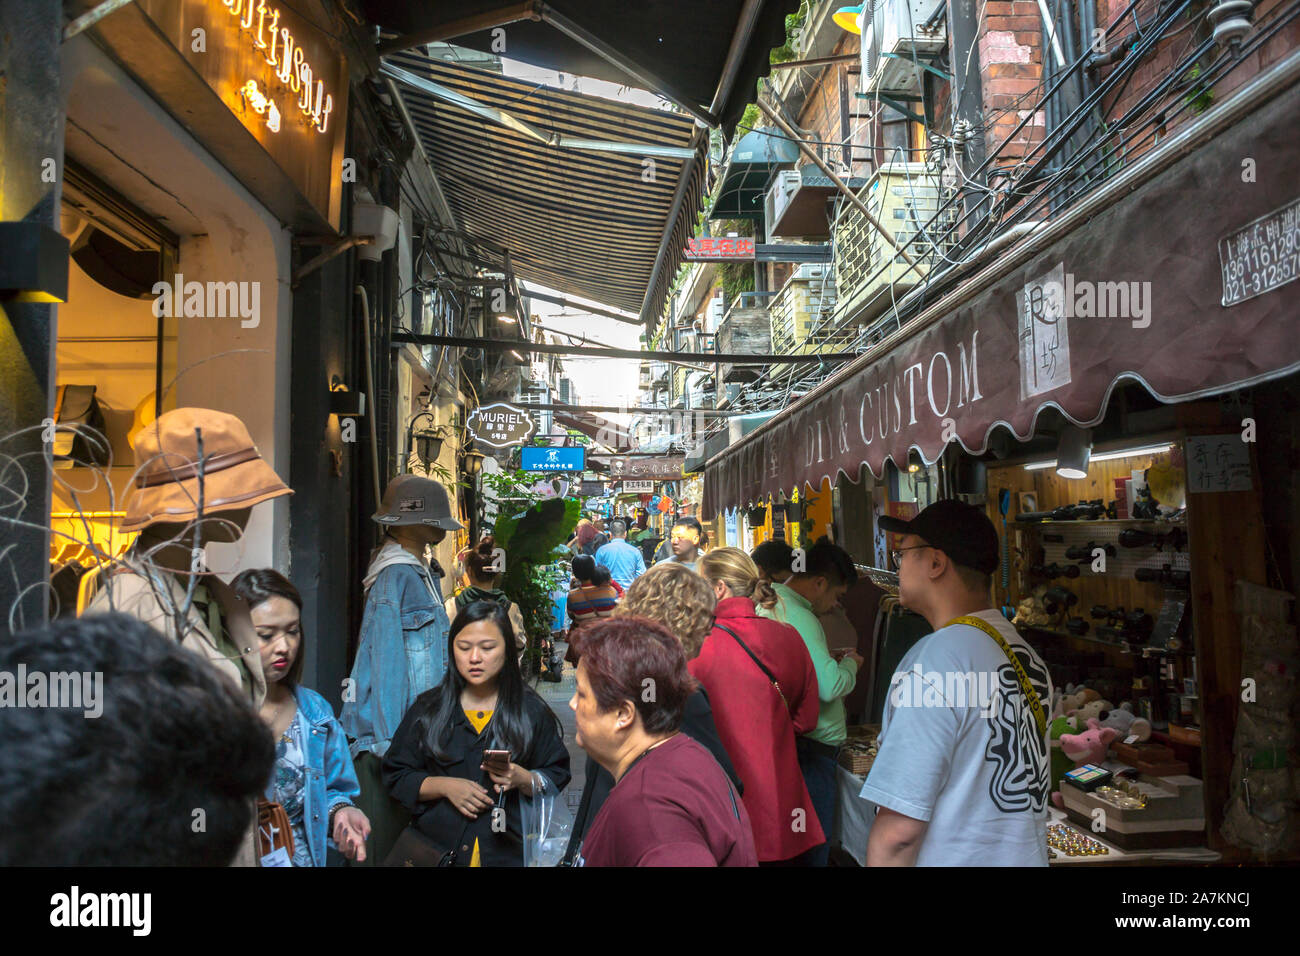 Shanghai, China, Large Crowd People, Tourists Visiting Old city, Chinese Historic Neighborhood, Street Scene, outdoor shopping overtourism Stock Photo